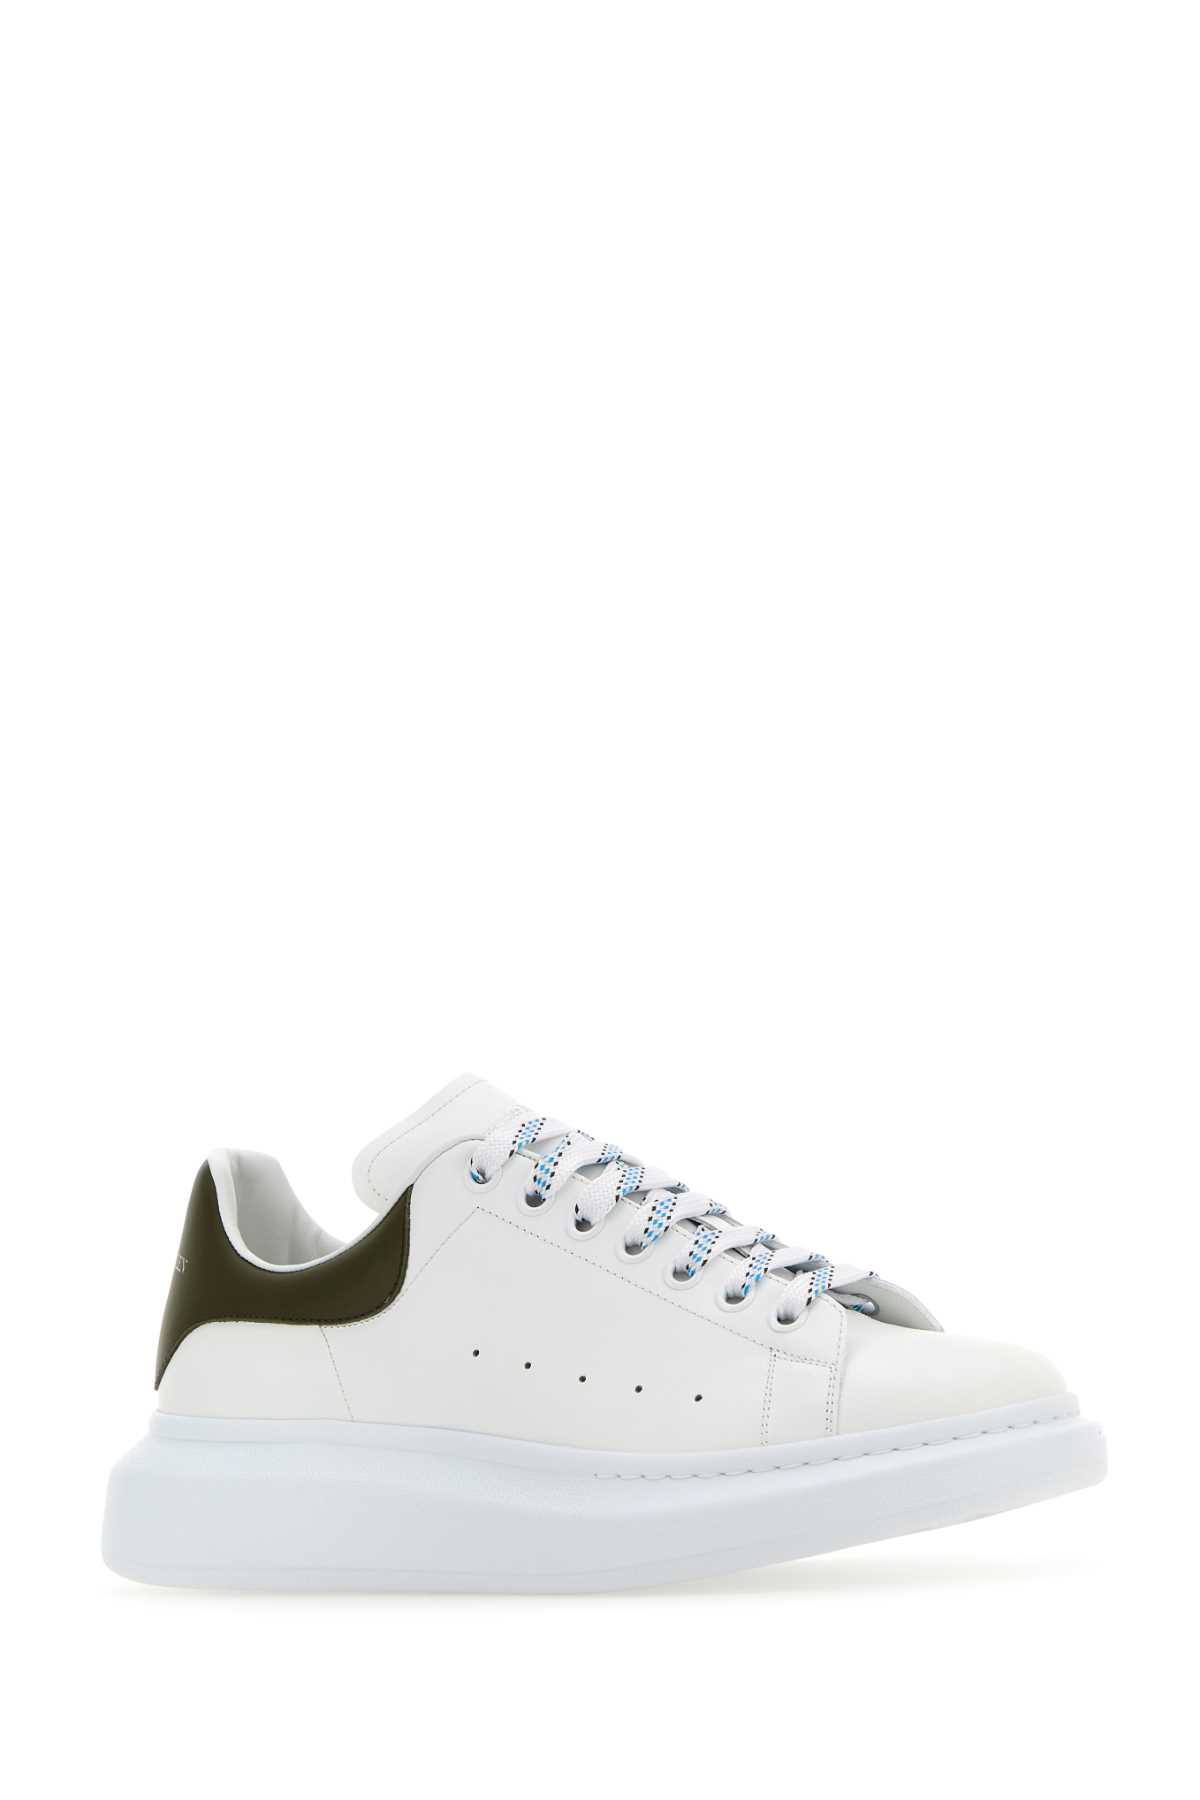 ALEXANDER MCQUEEN WHITE LEATHER SNEAKERS WITH ARMY GREEN LEATHER HEEL